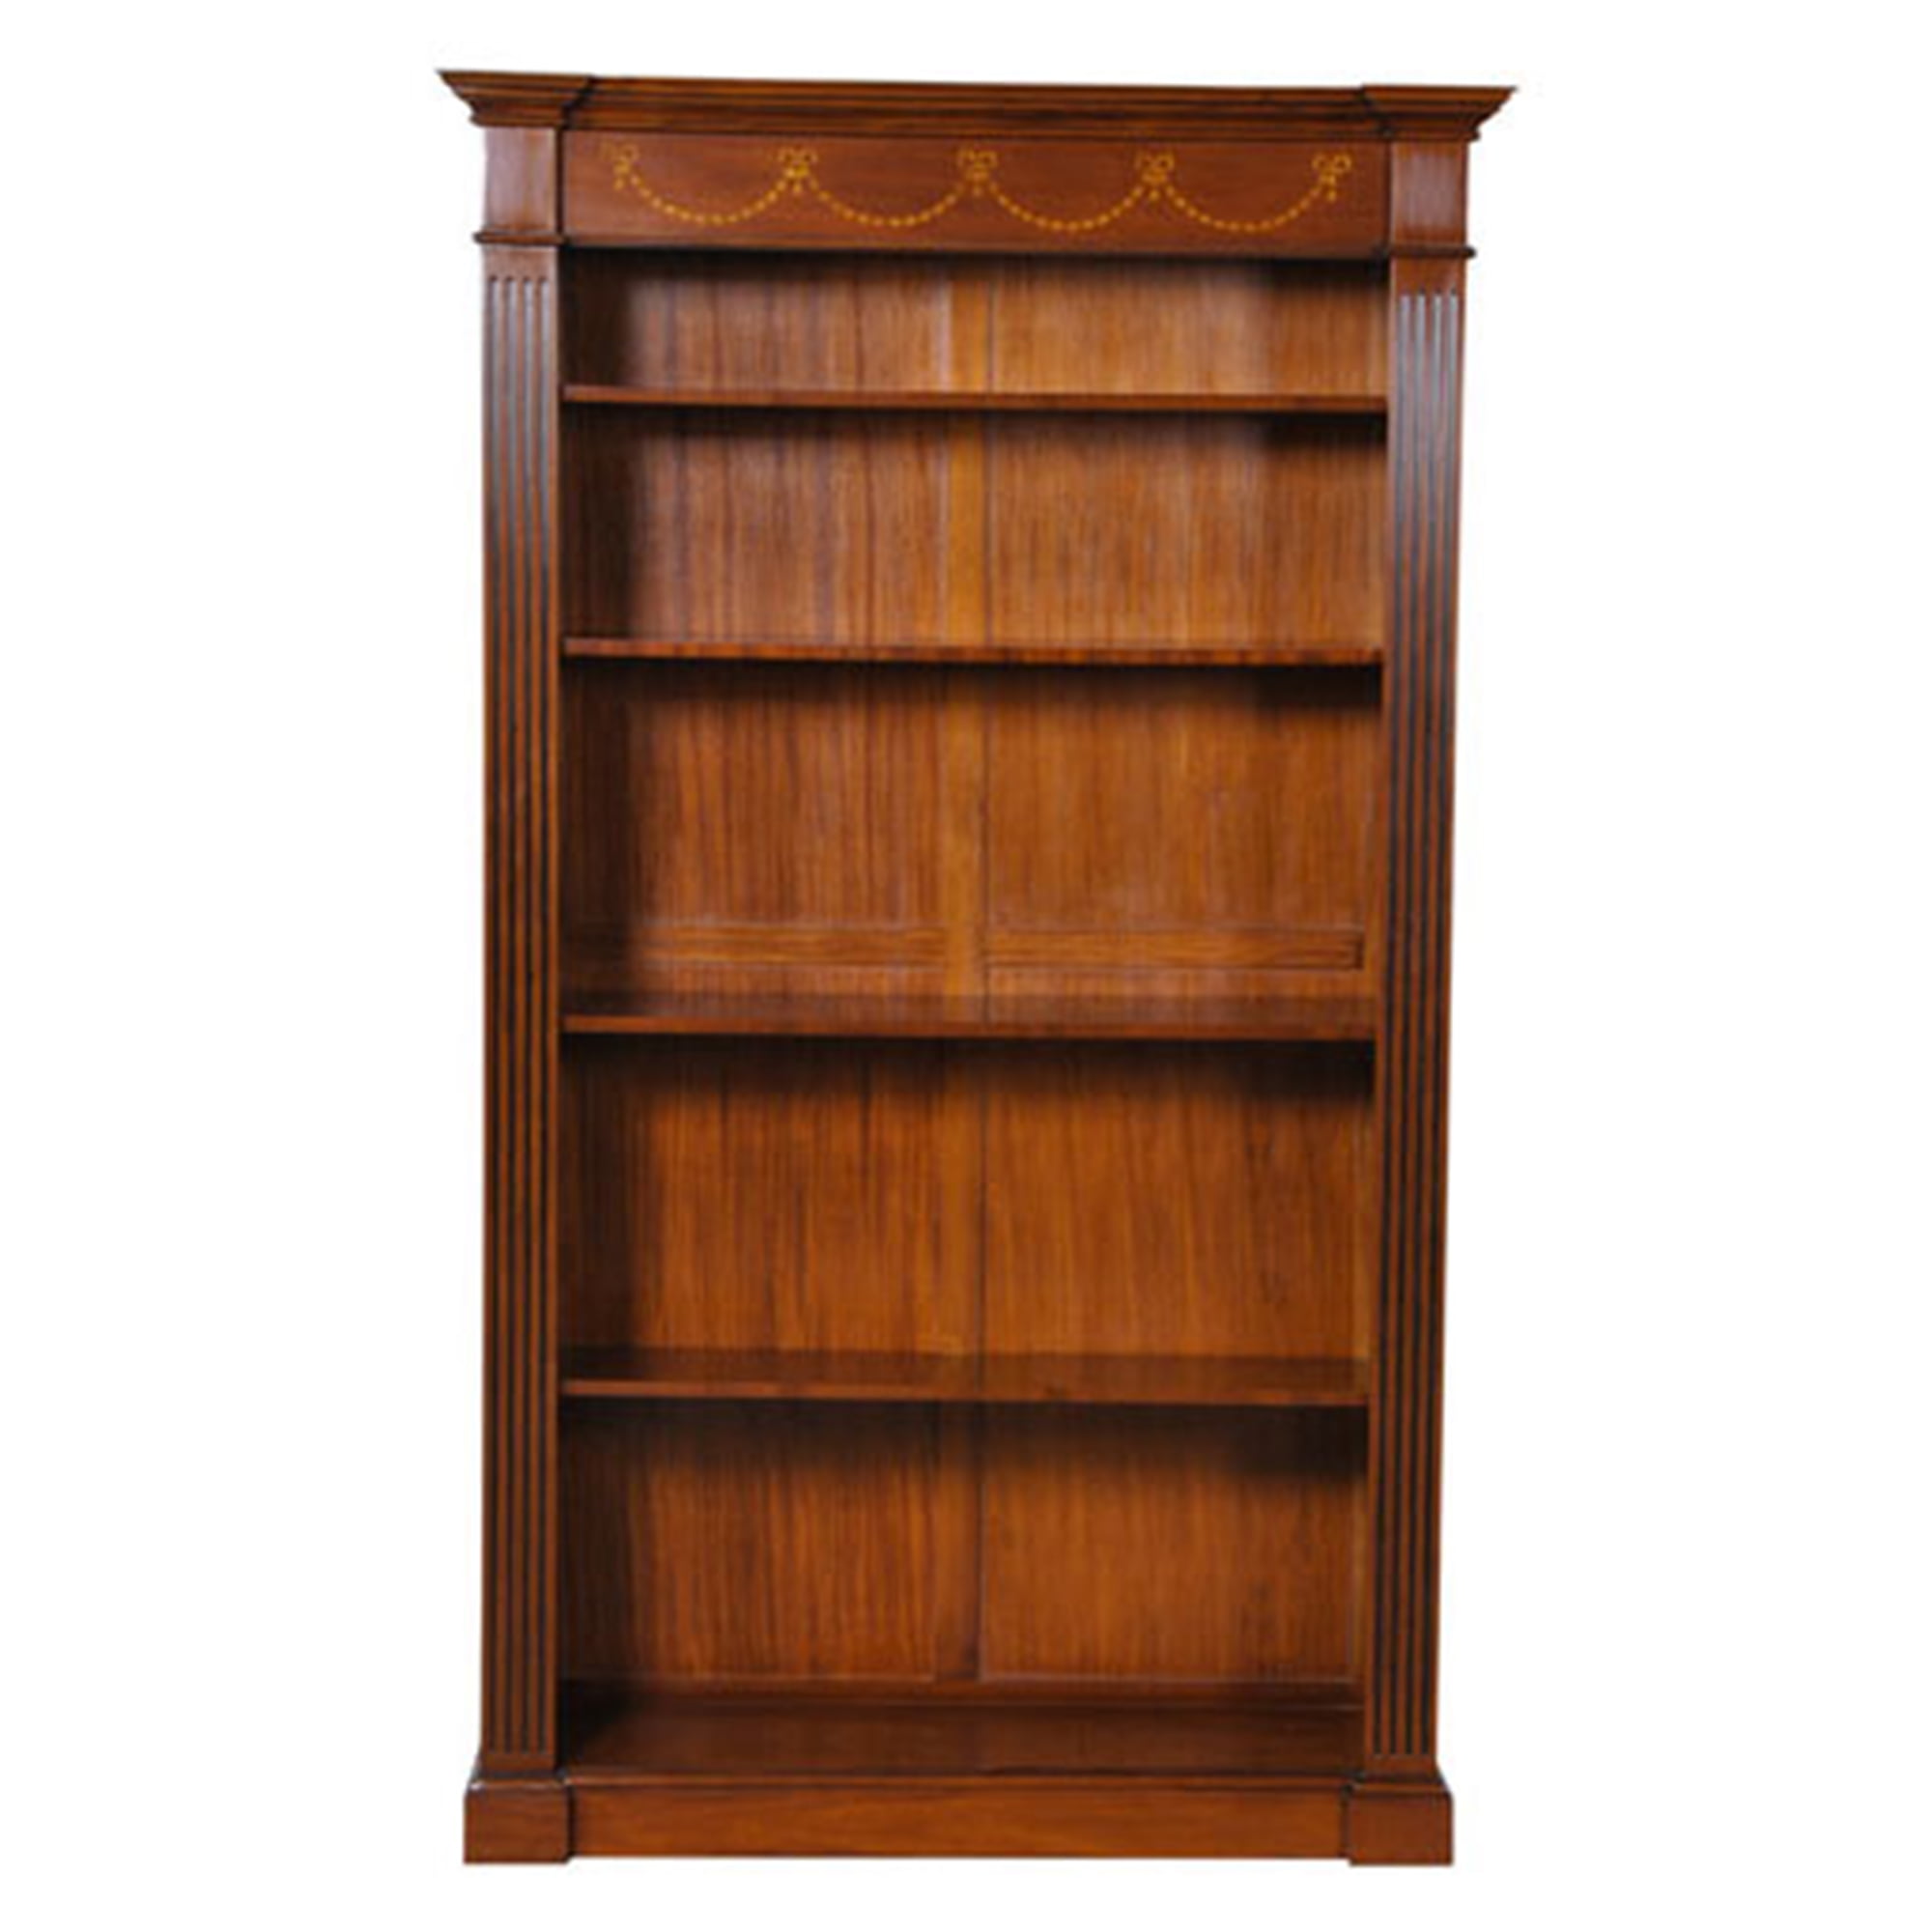  Mahogany Bookcase for Large Space